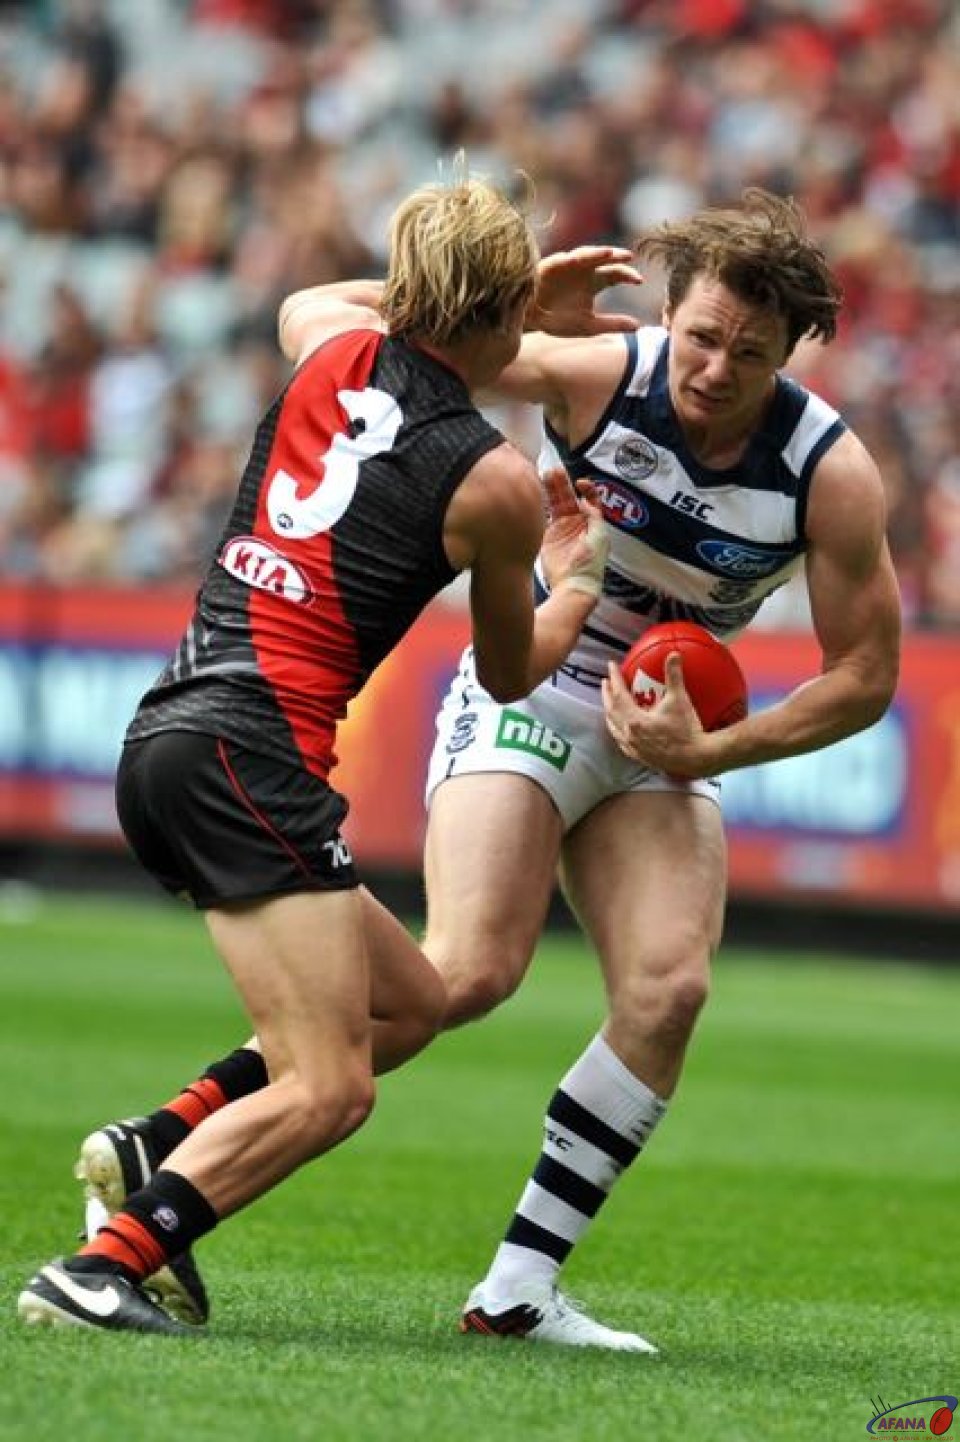 Darcy Parish tackles Paddy dangerfield